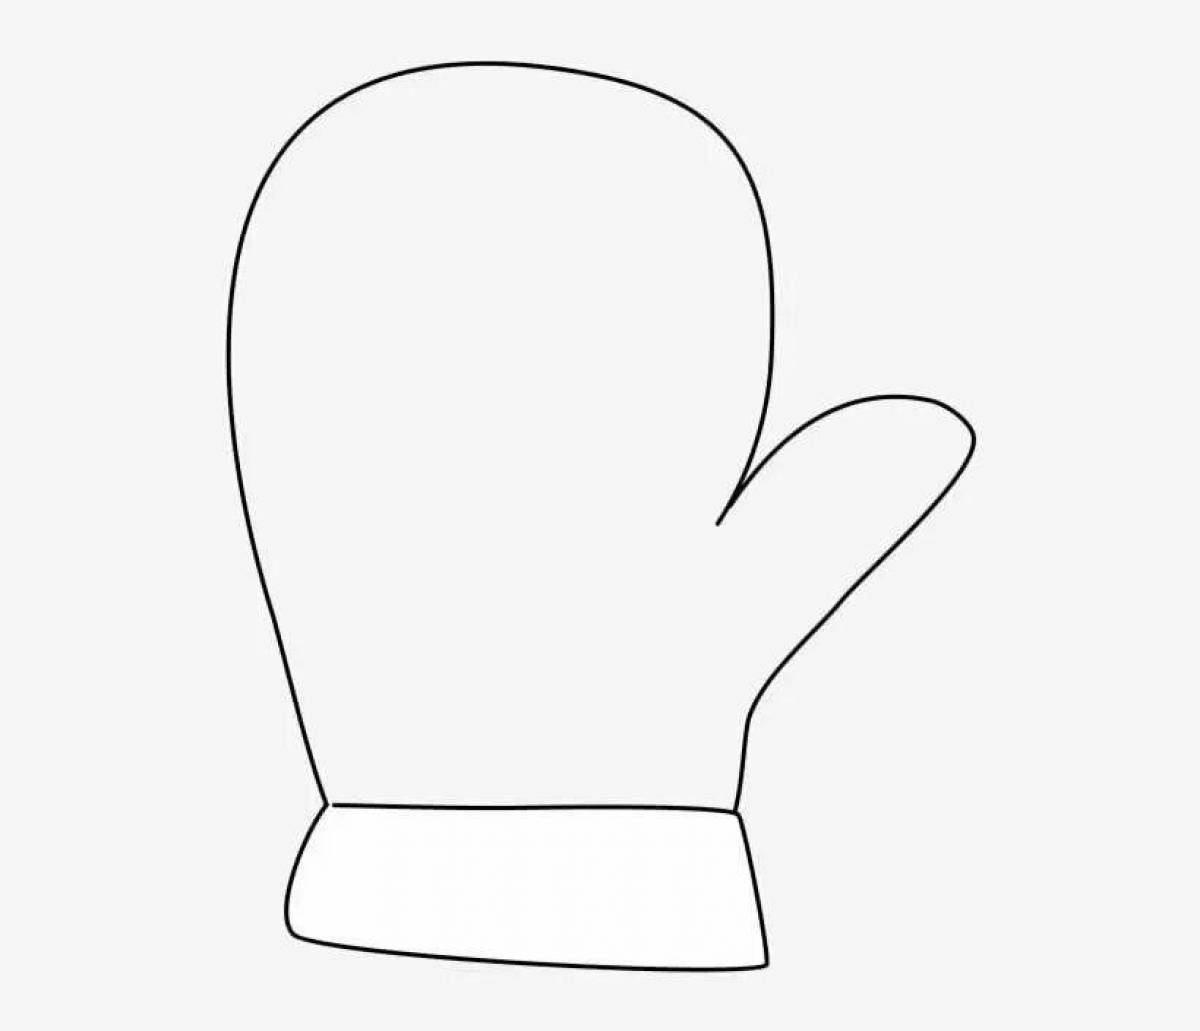 Colourful mitten coloring page